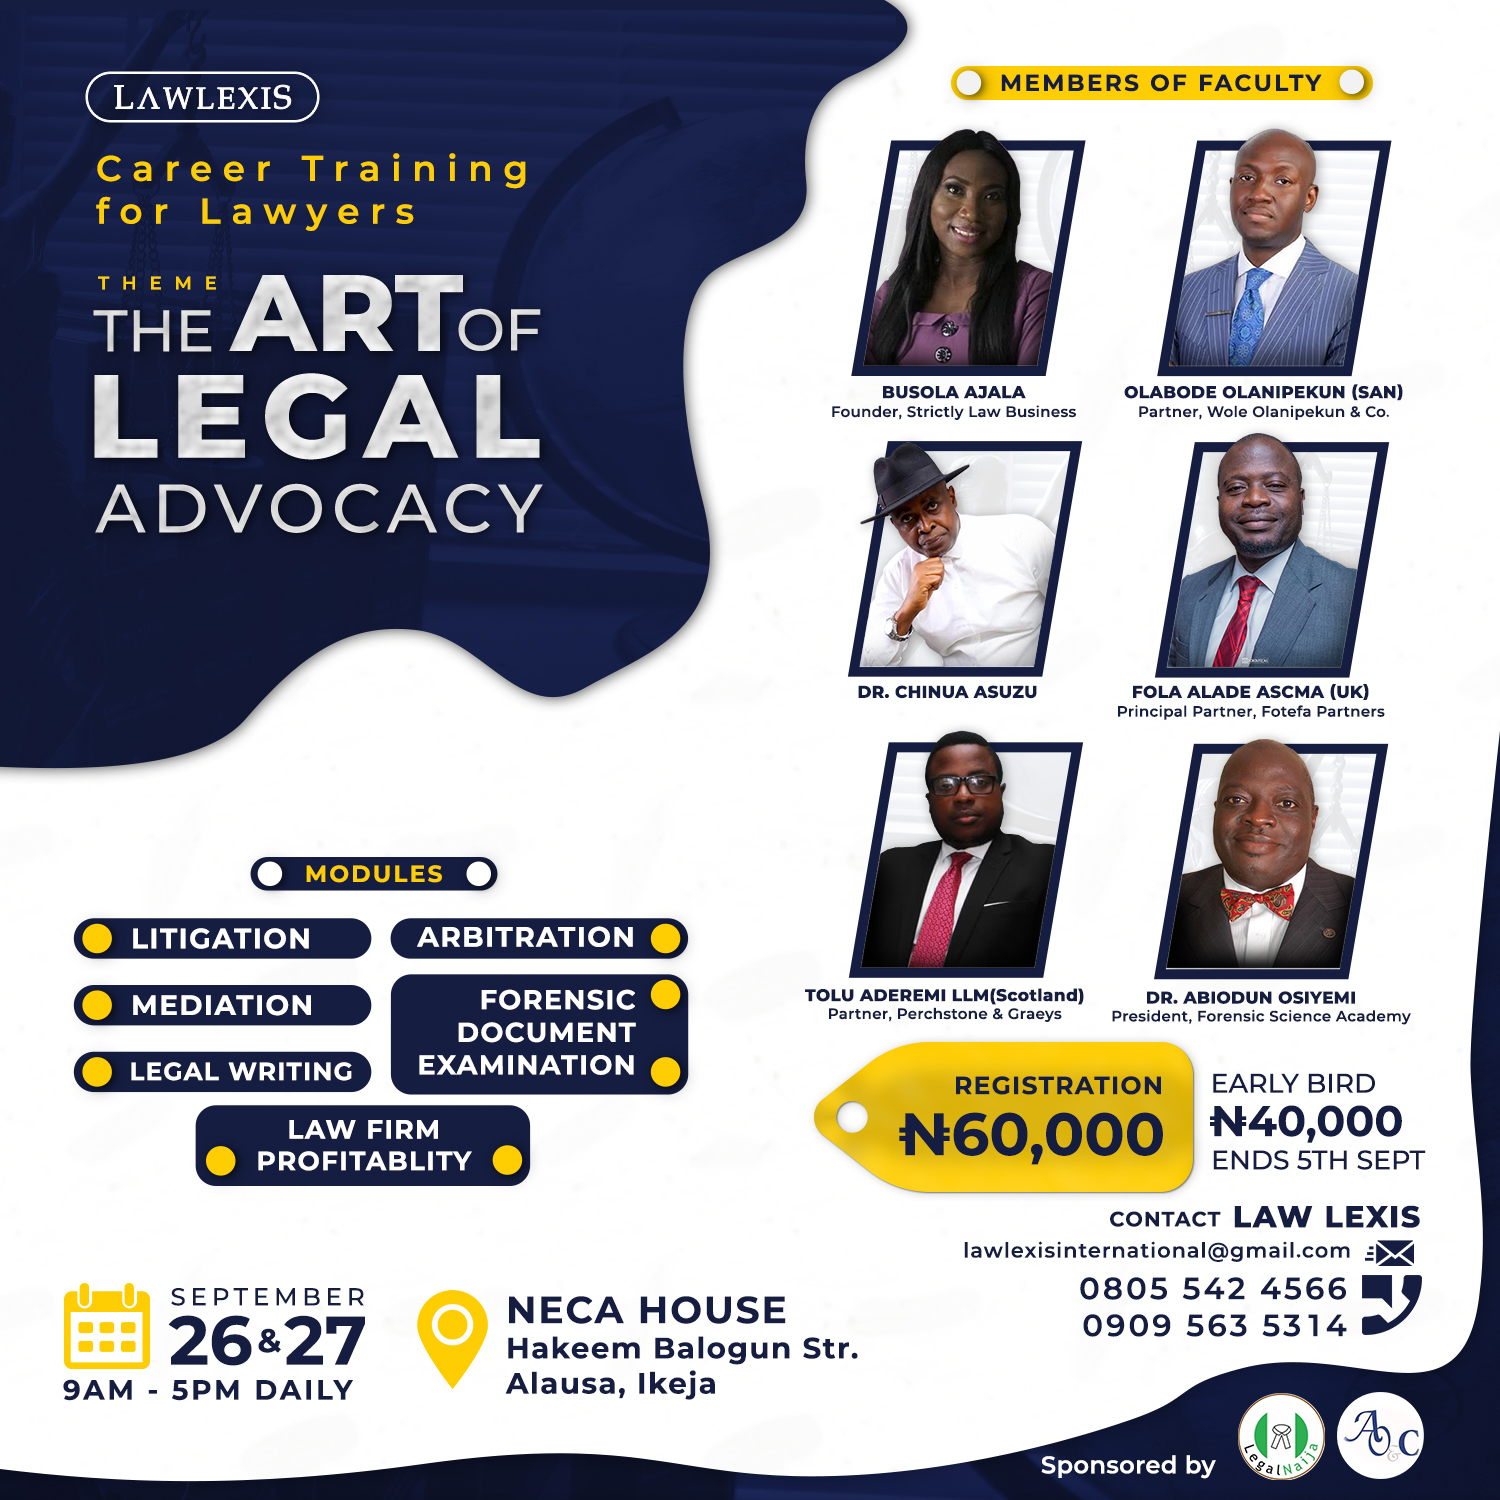 10 Reasons Why Lawyers Should Participate In The Art of Legal Advocacy Career Training